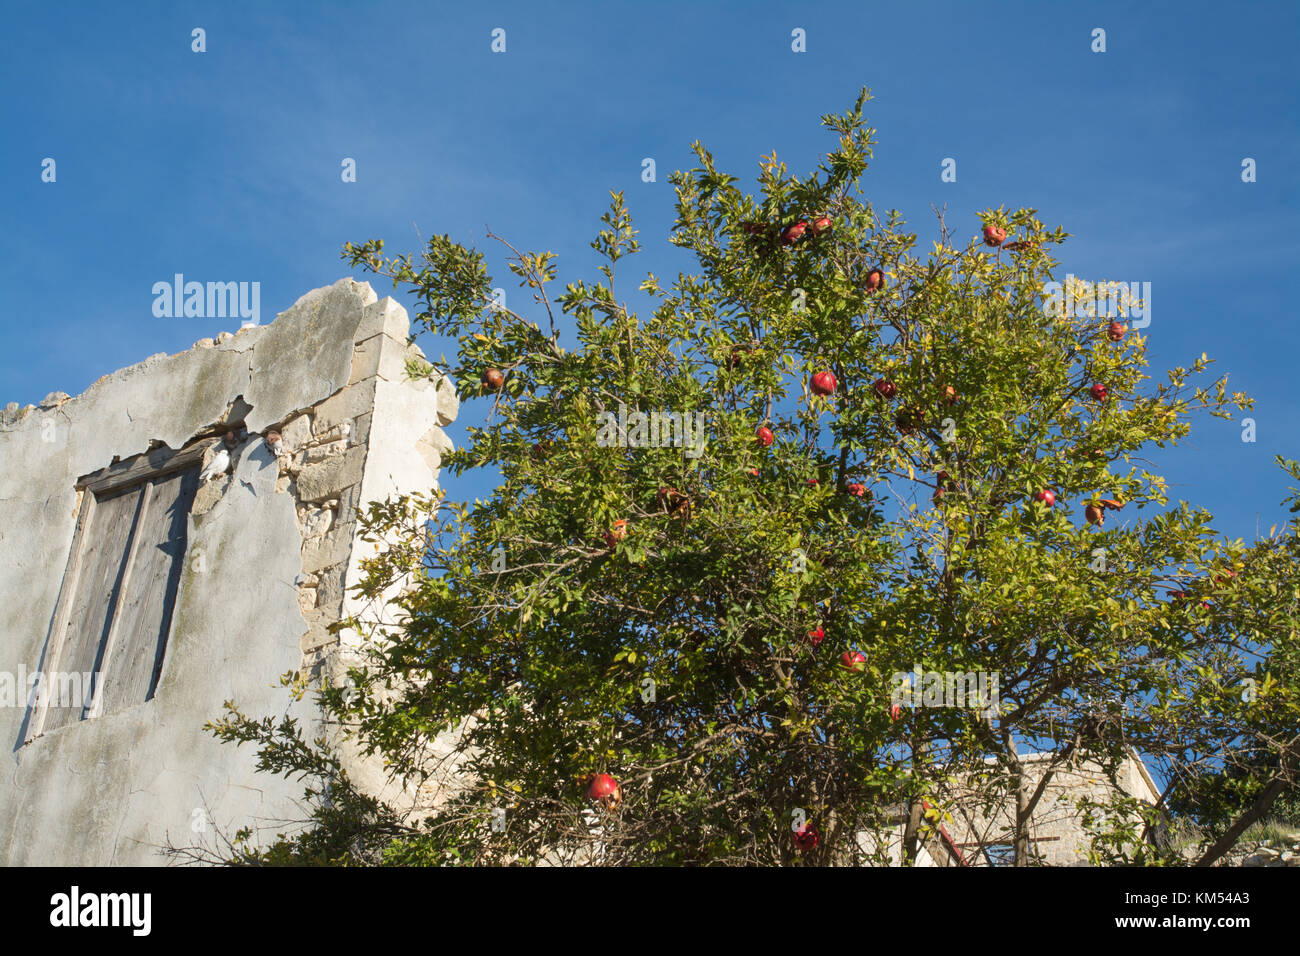 Pomegranate tree (Punica granatum) with red fruit in a village in Cyprus Stock Photo